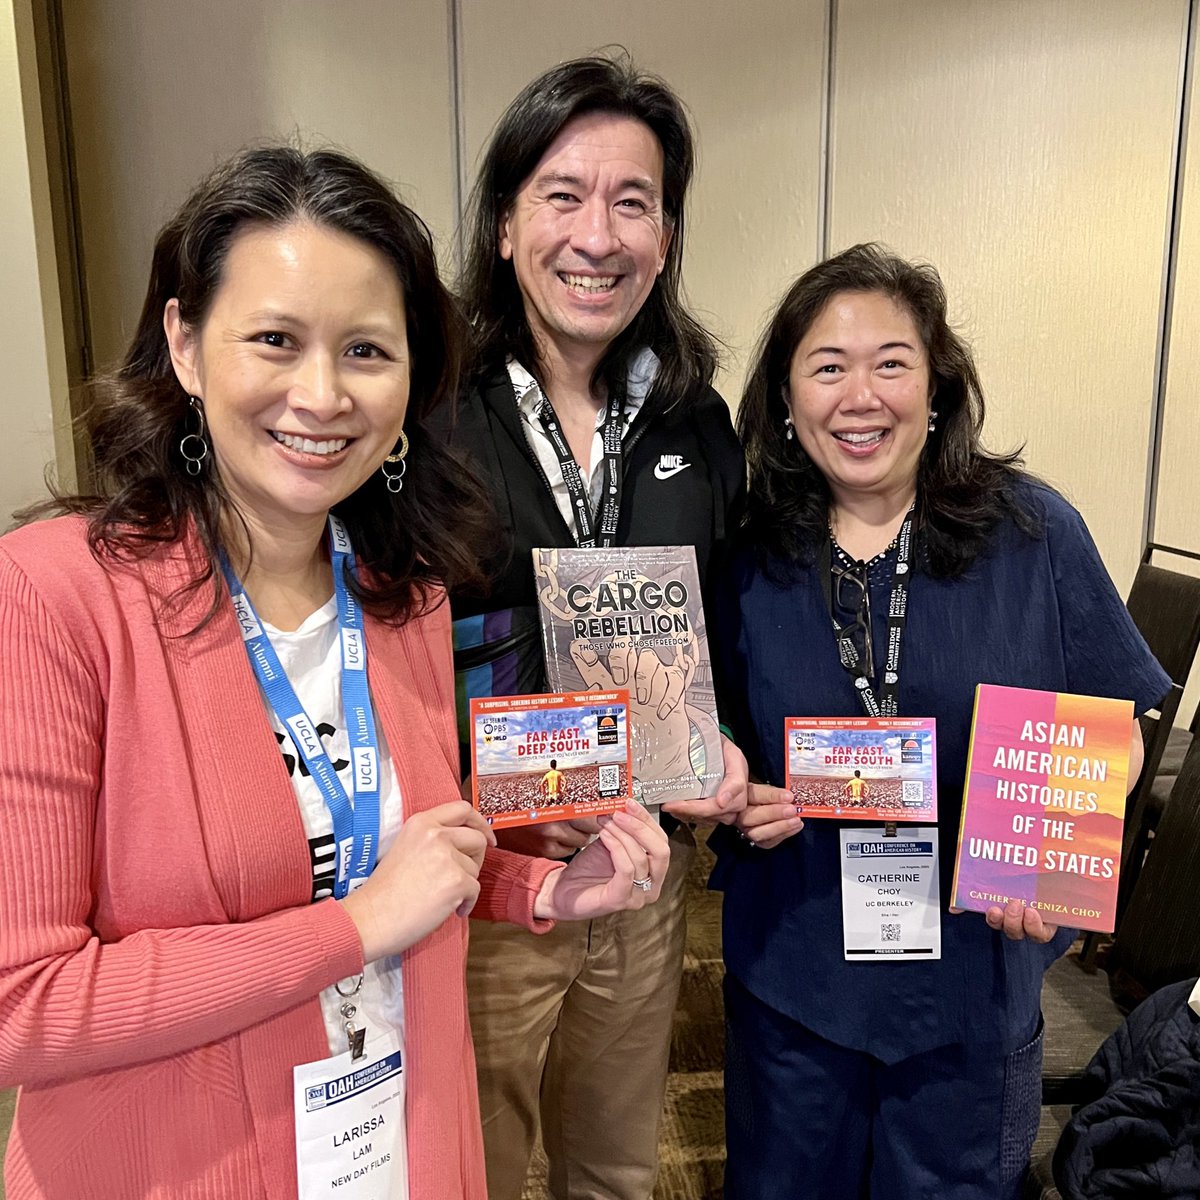 Loved hearing from @CCenizaChoy @chinotronic at #OAH23 the need to share #AAPI history w/ public. We need to help shape the messages media is covering on #AAPIs 📚 Add their books “Asian American Histories of US” & “The Cargo Rebellion” to your reading list #oah2023